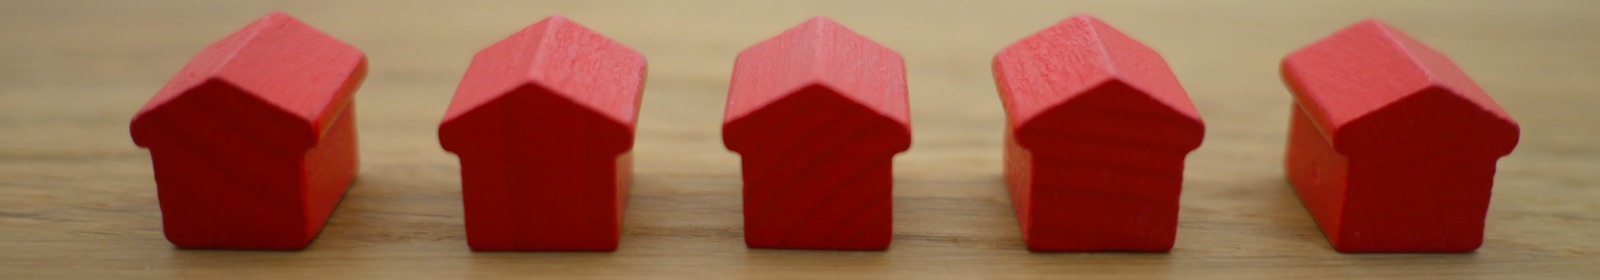 red monopoly houses on table